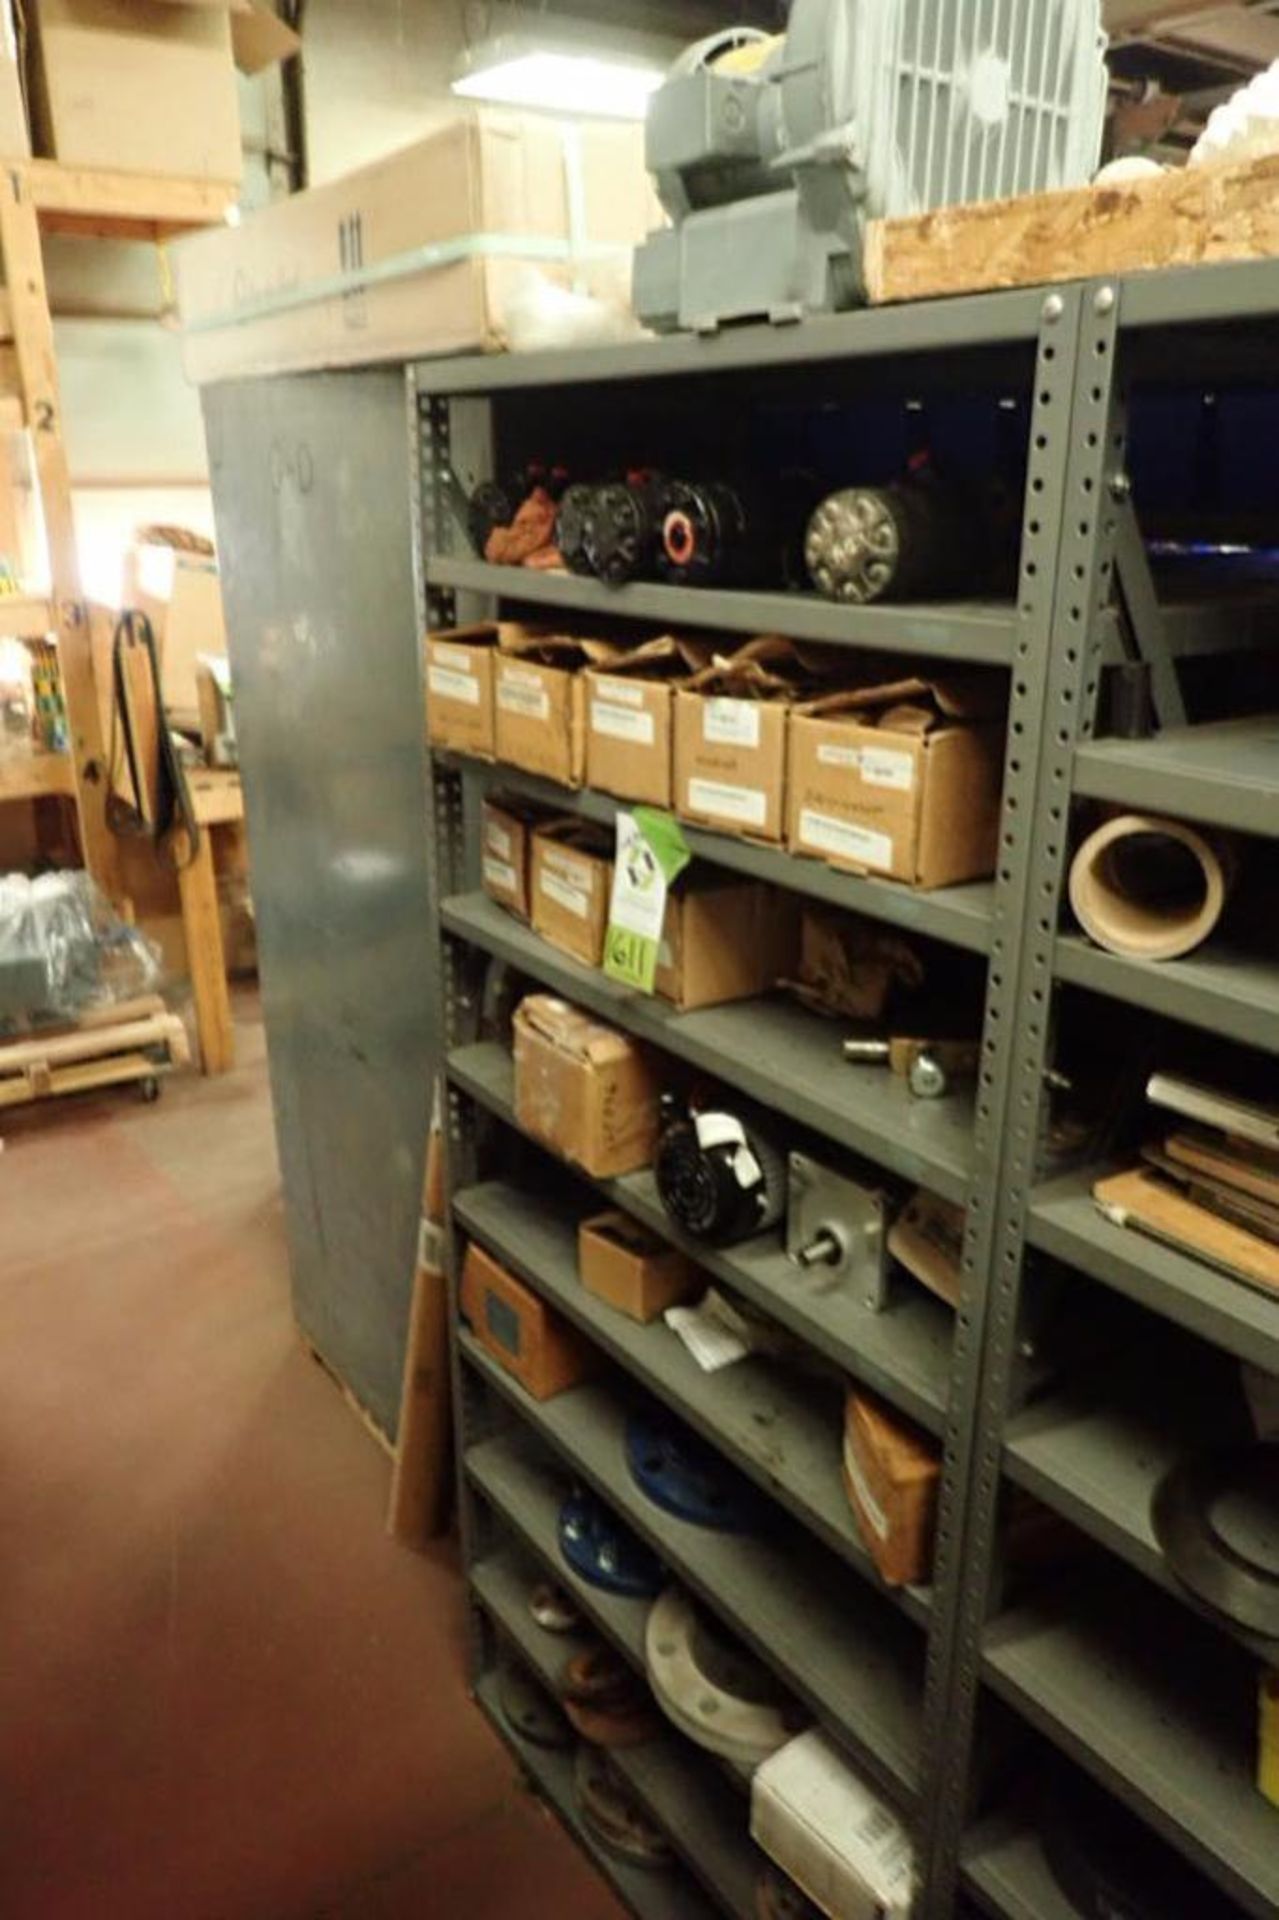 Contents only of 1 section of shelving, hydraulic motors, electric motors, water pipe flanges ** Rig